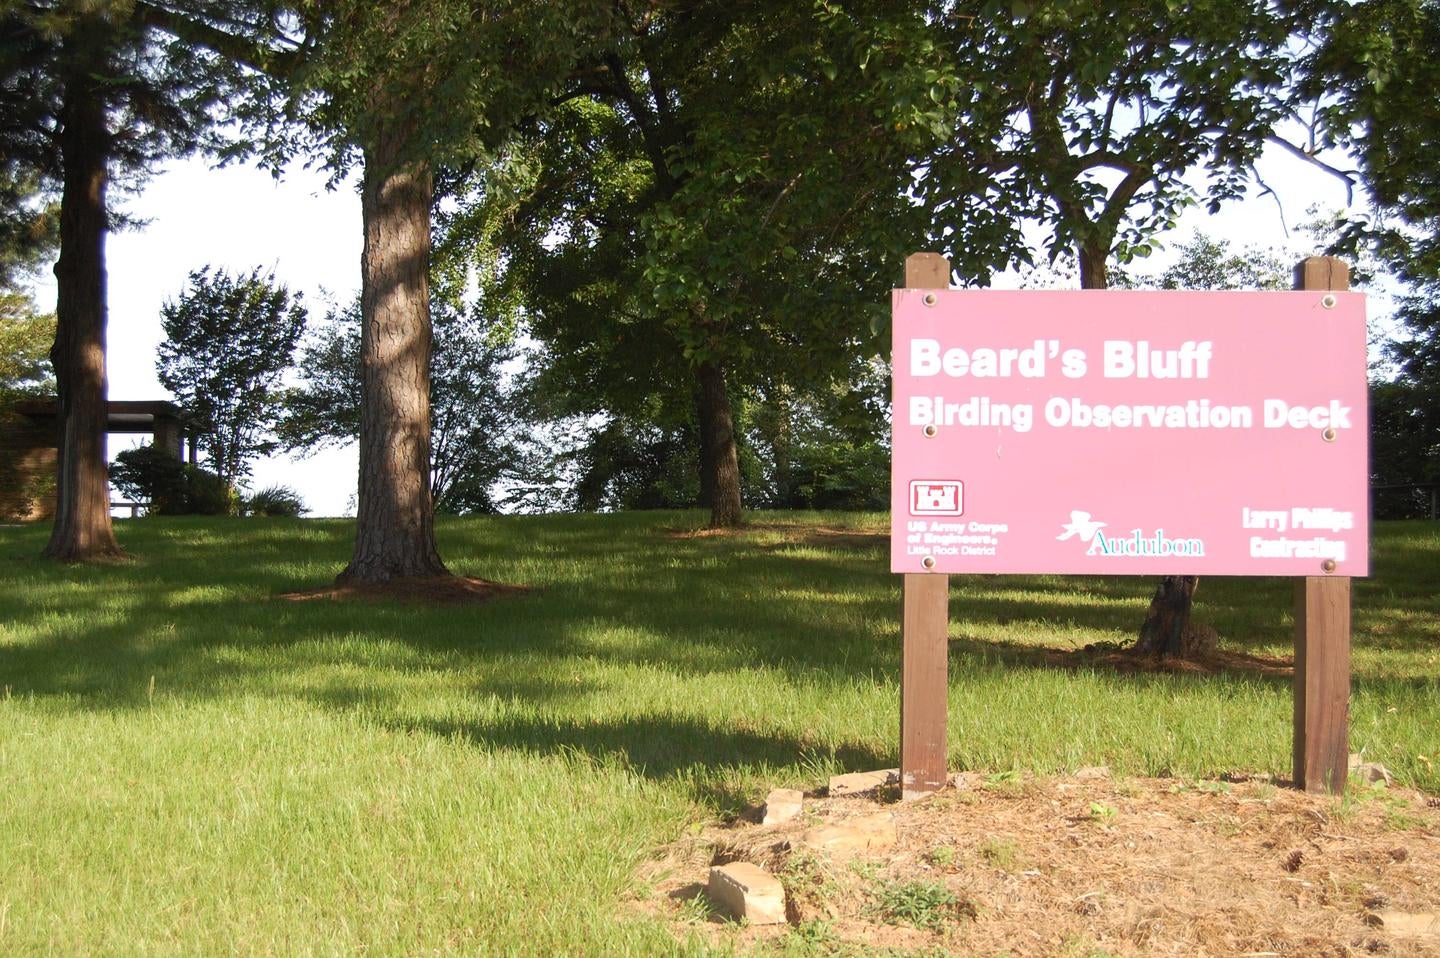 Camper submitted image from Beard's Bluff Park (AR) - 2